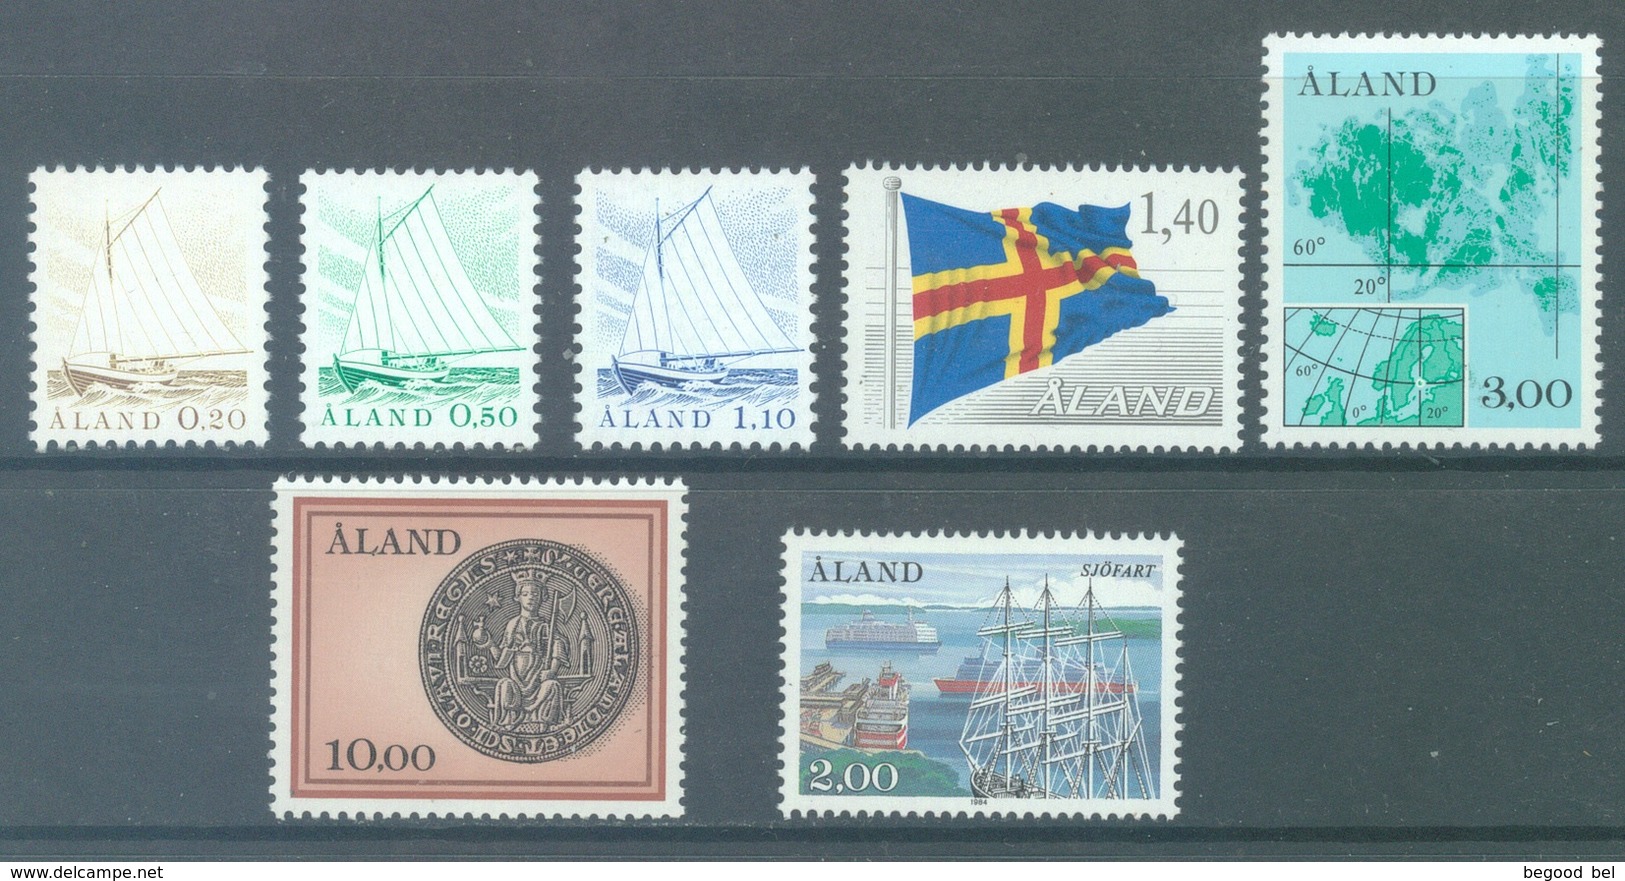 ALAND - 1984 -MNH/*** LUXE - YEAR COMPLETE - Yv 1-7 - Lot 20765 - Aland